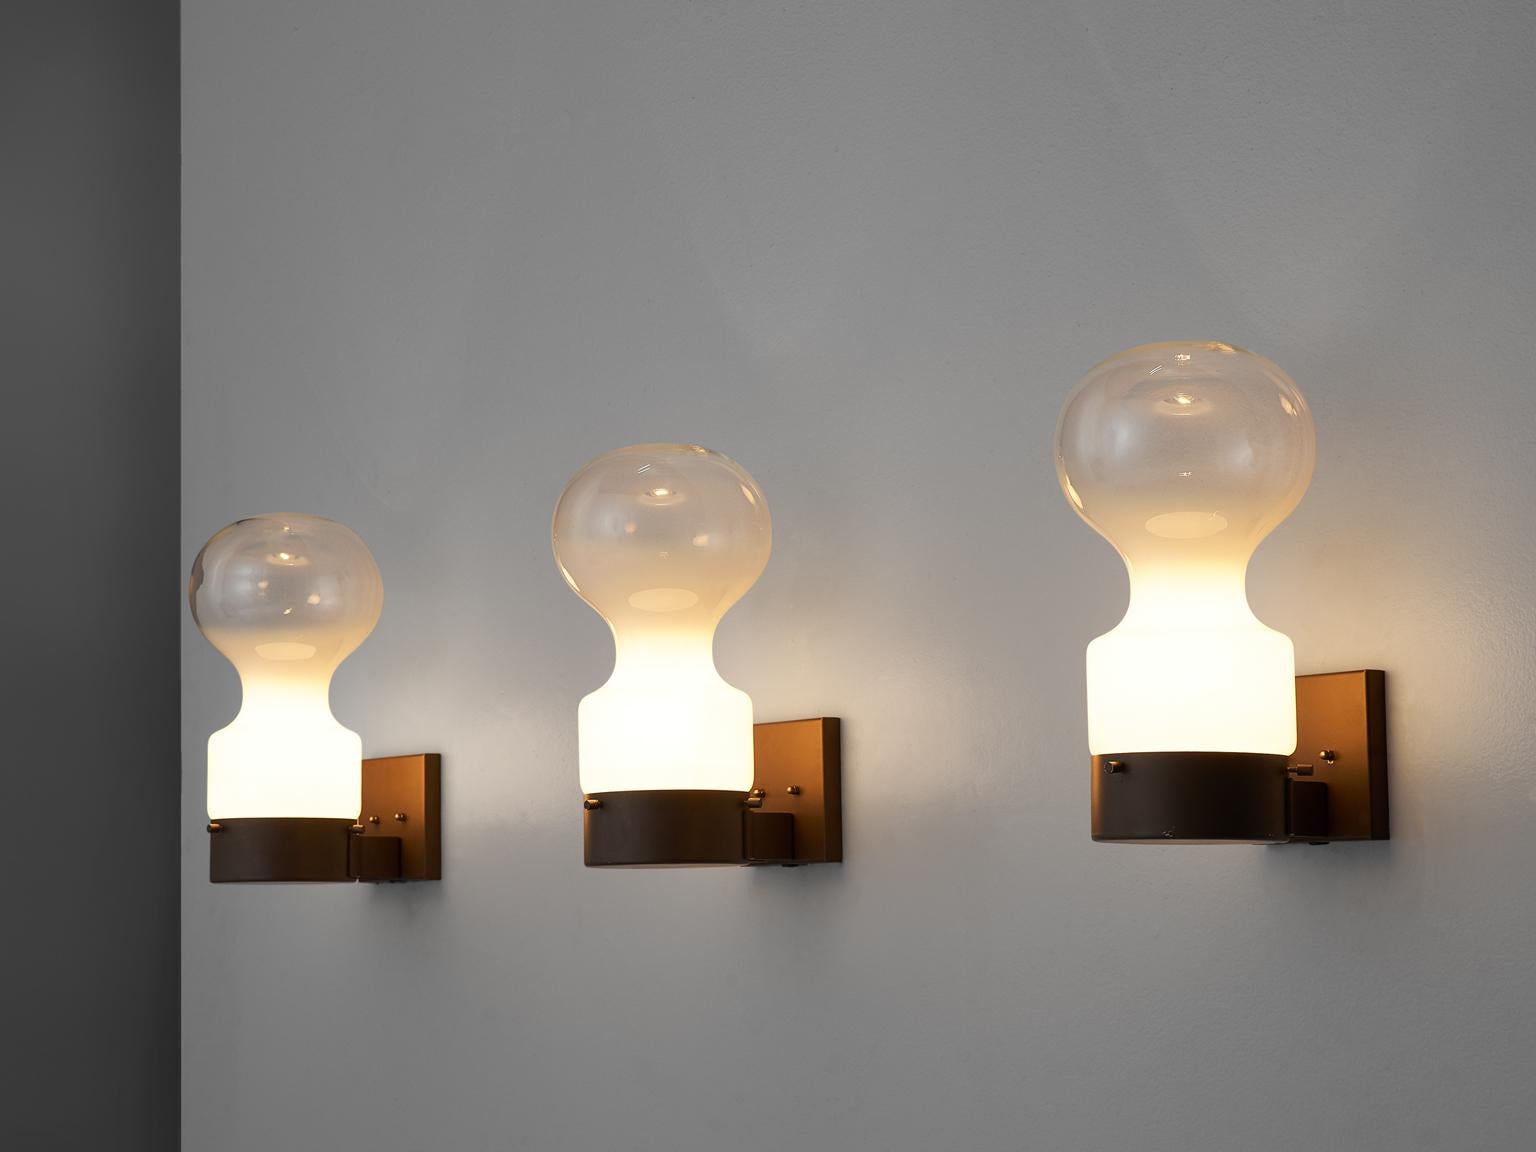 RAAK Amsterdam, dew drop wall lights, glass, iron, The Netherlands, 1960s.

This set of three wall lights is designed by RAAK Amsterdam. The frame is made of brown iron and the bulbs are made of glass. The bottom half of the shade is opaque and the